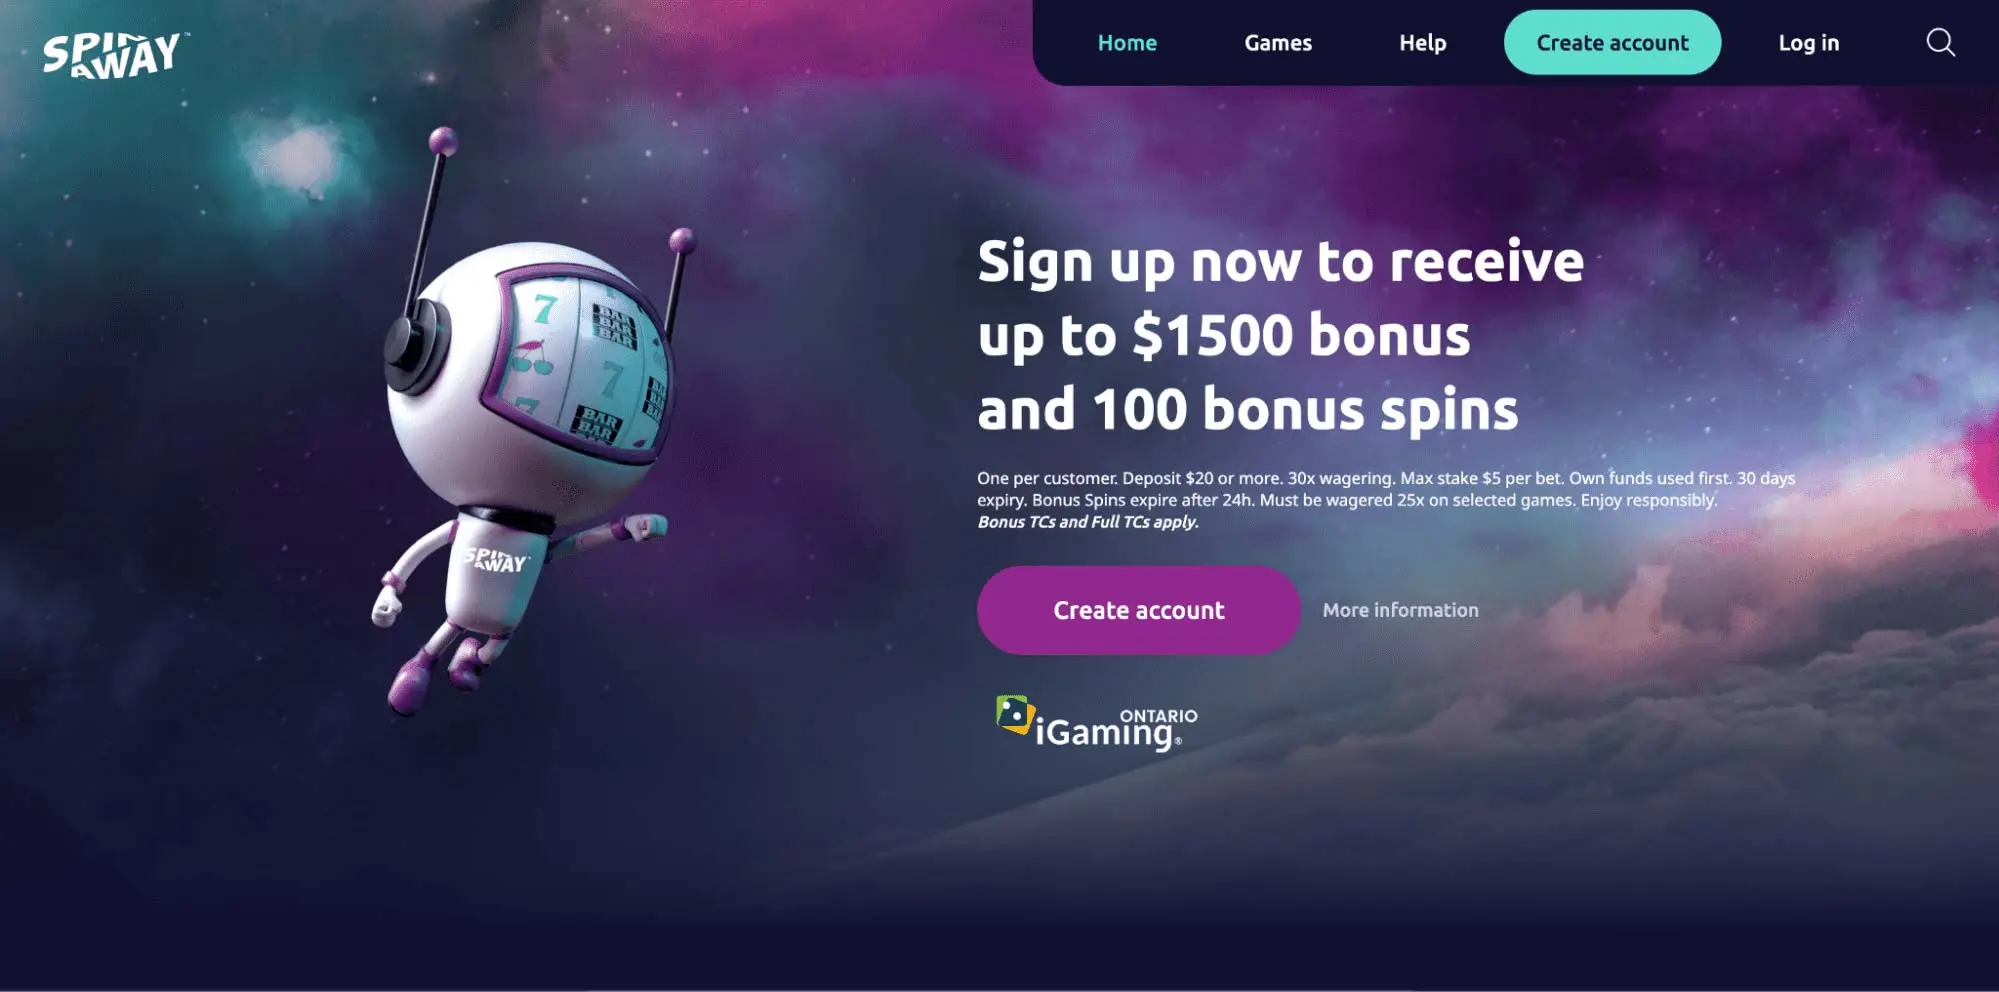 SPIN AWAY casino - online casino for Canadian players.